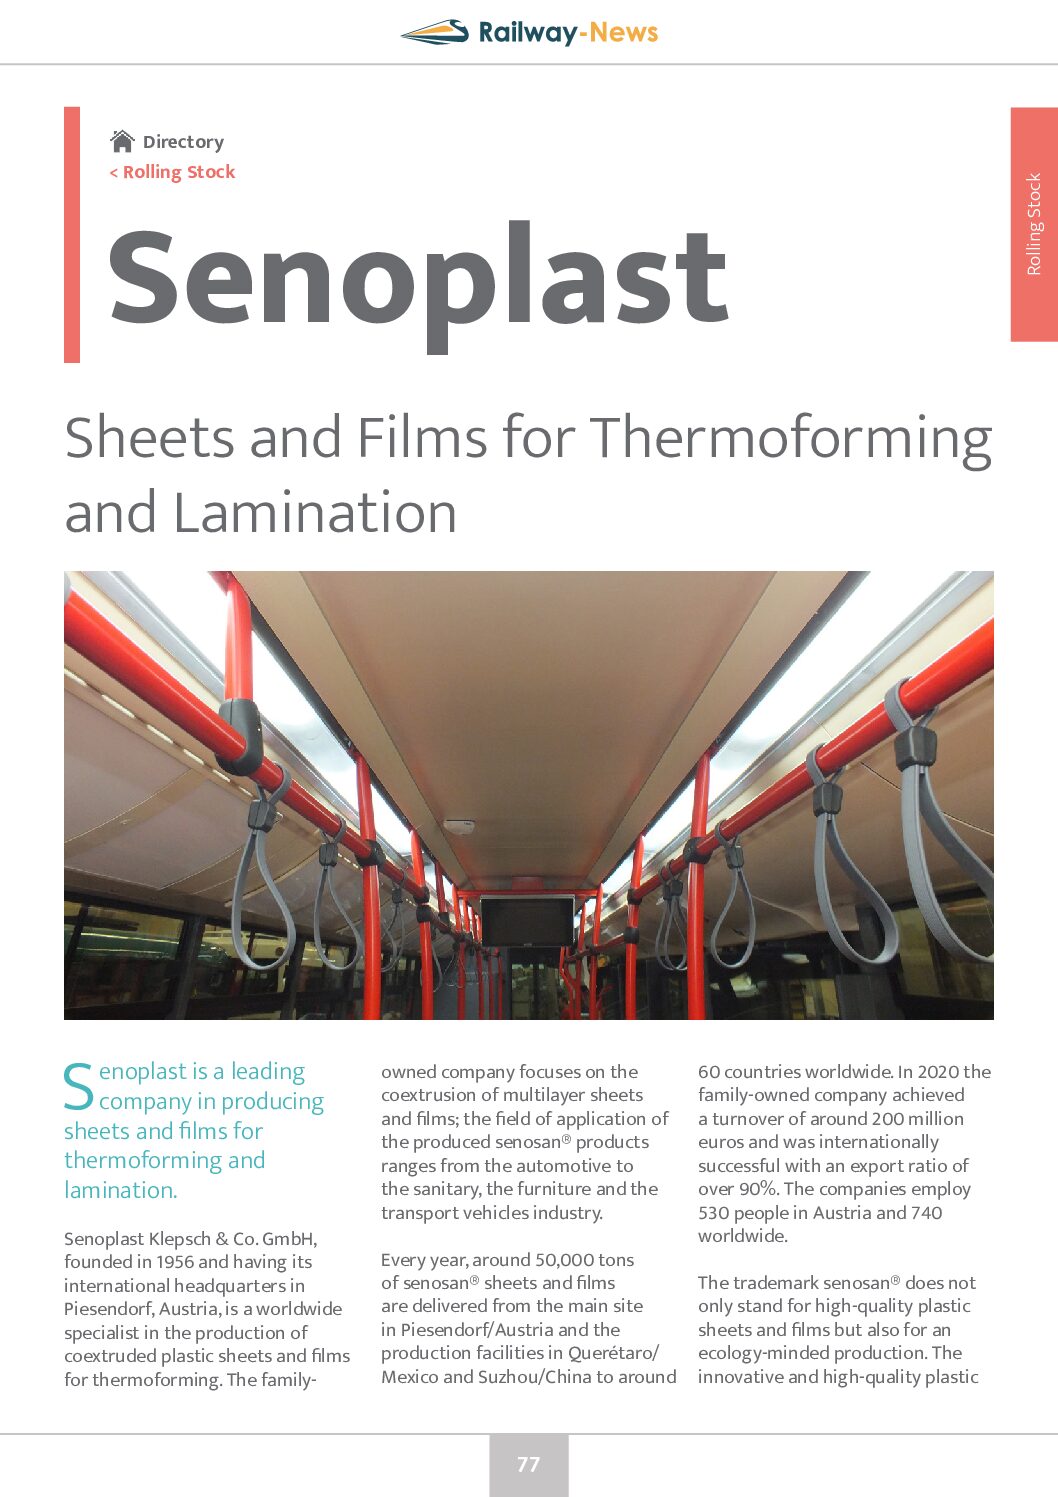 Senoplast – Sheets and Films for Thermoforming and Lamination